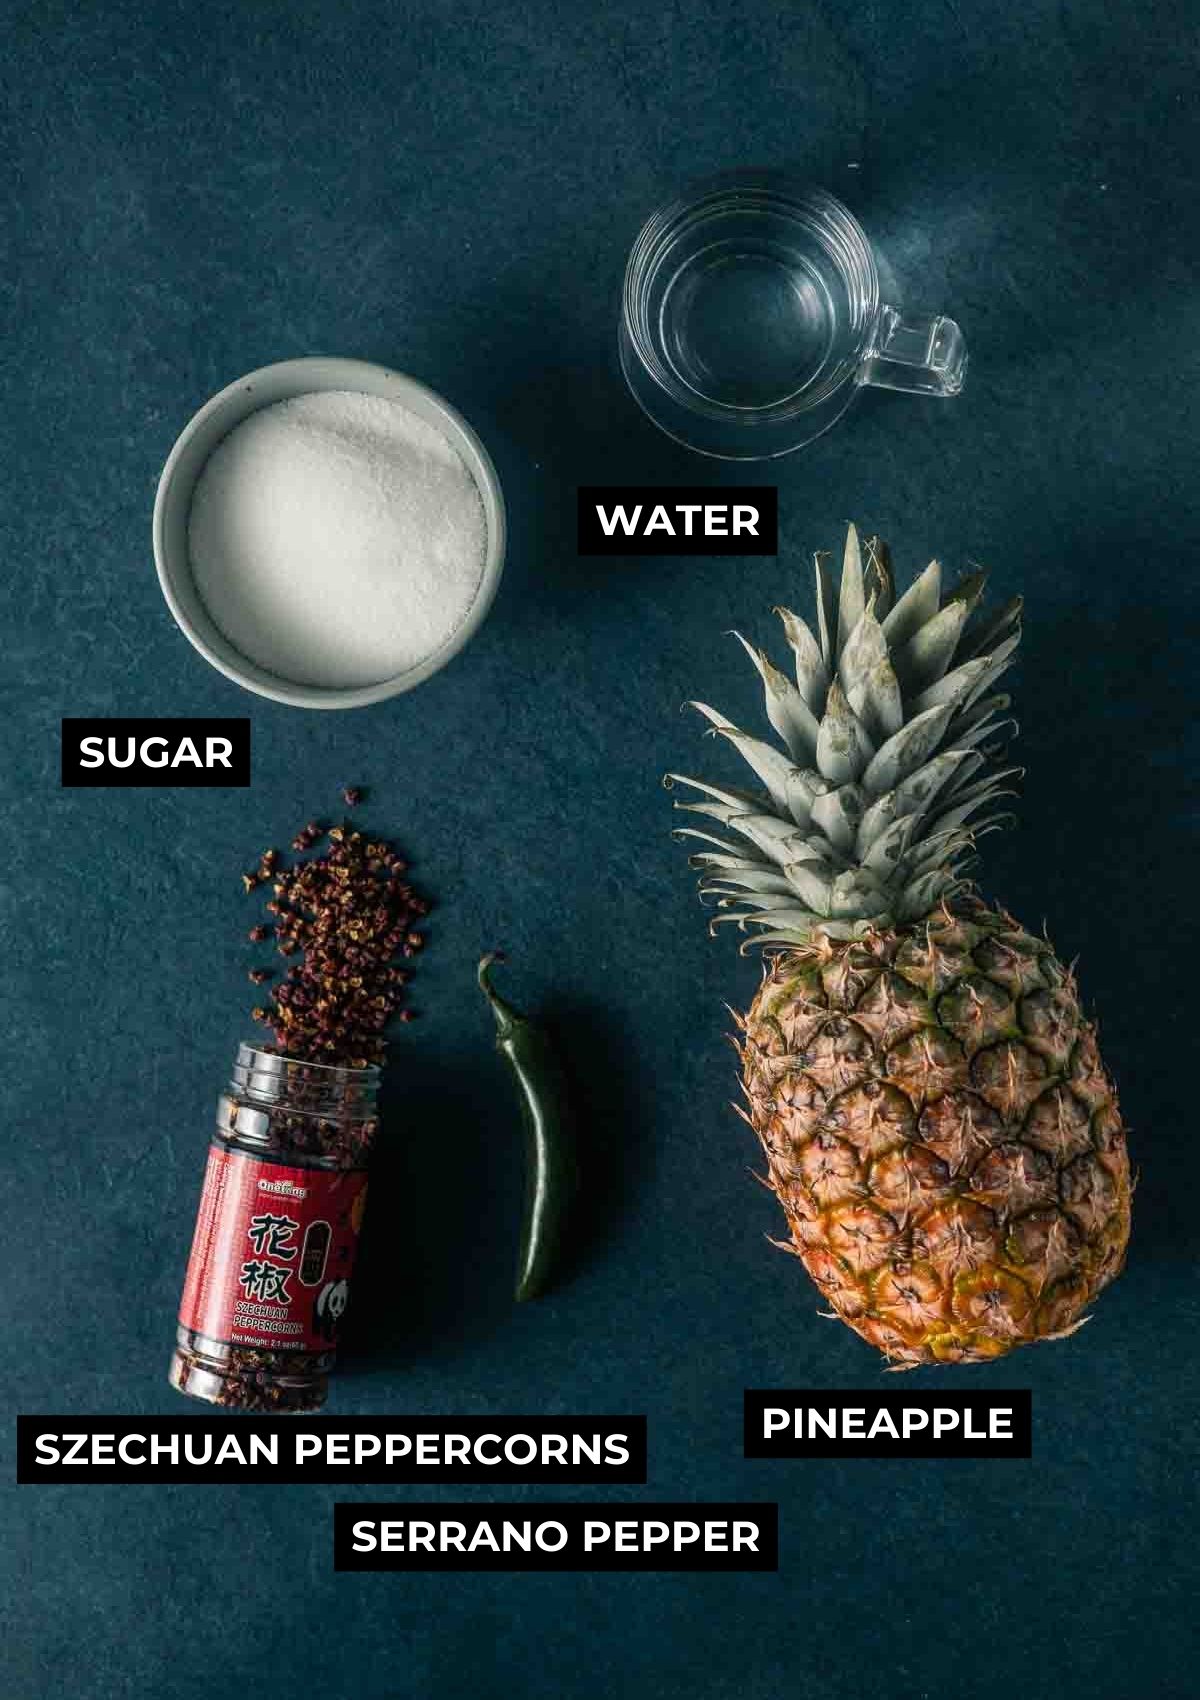 Ingredients for the simple syrup.